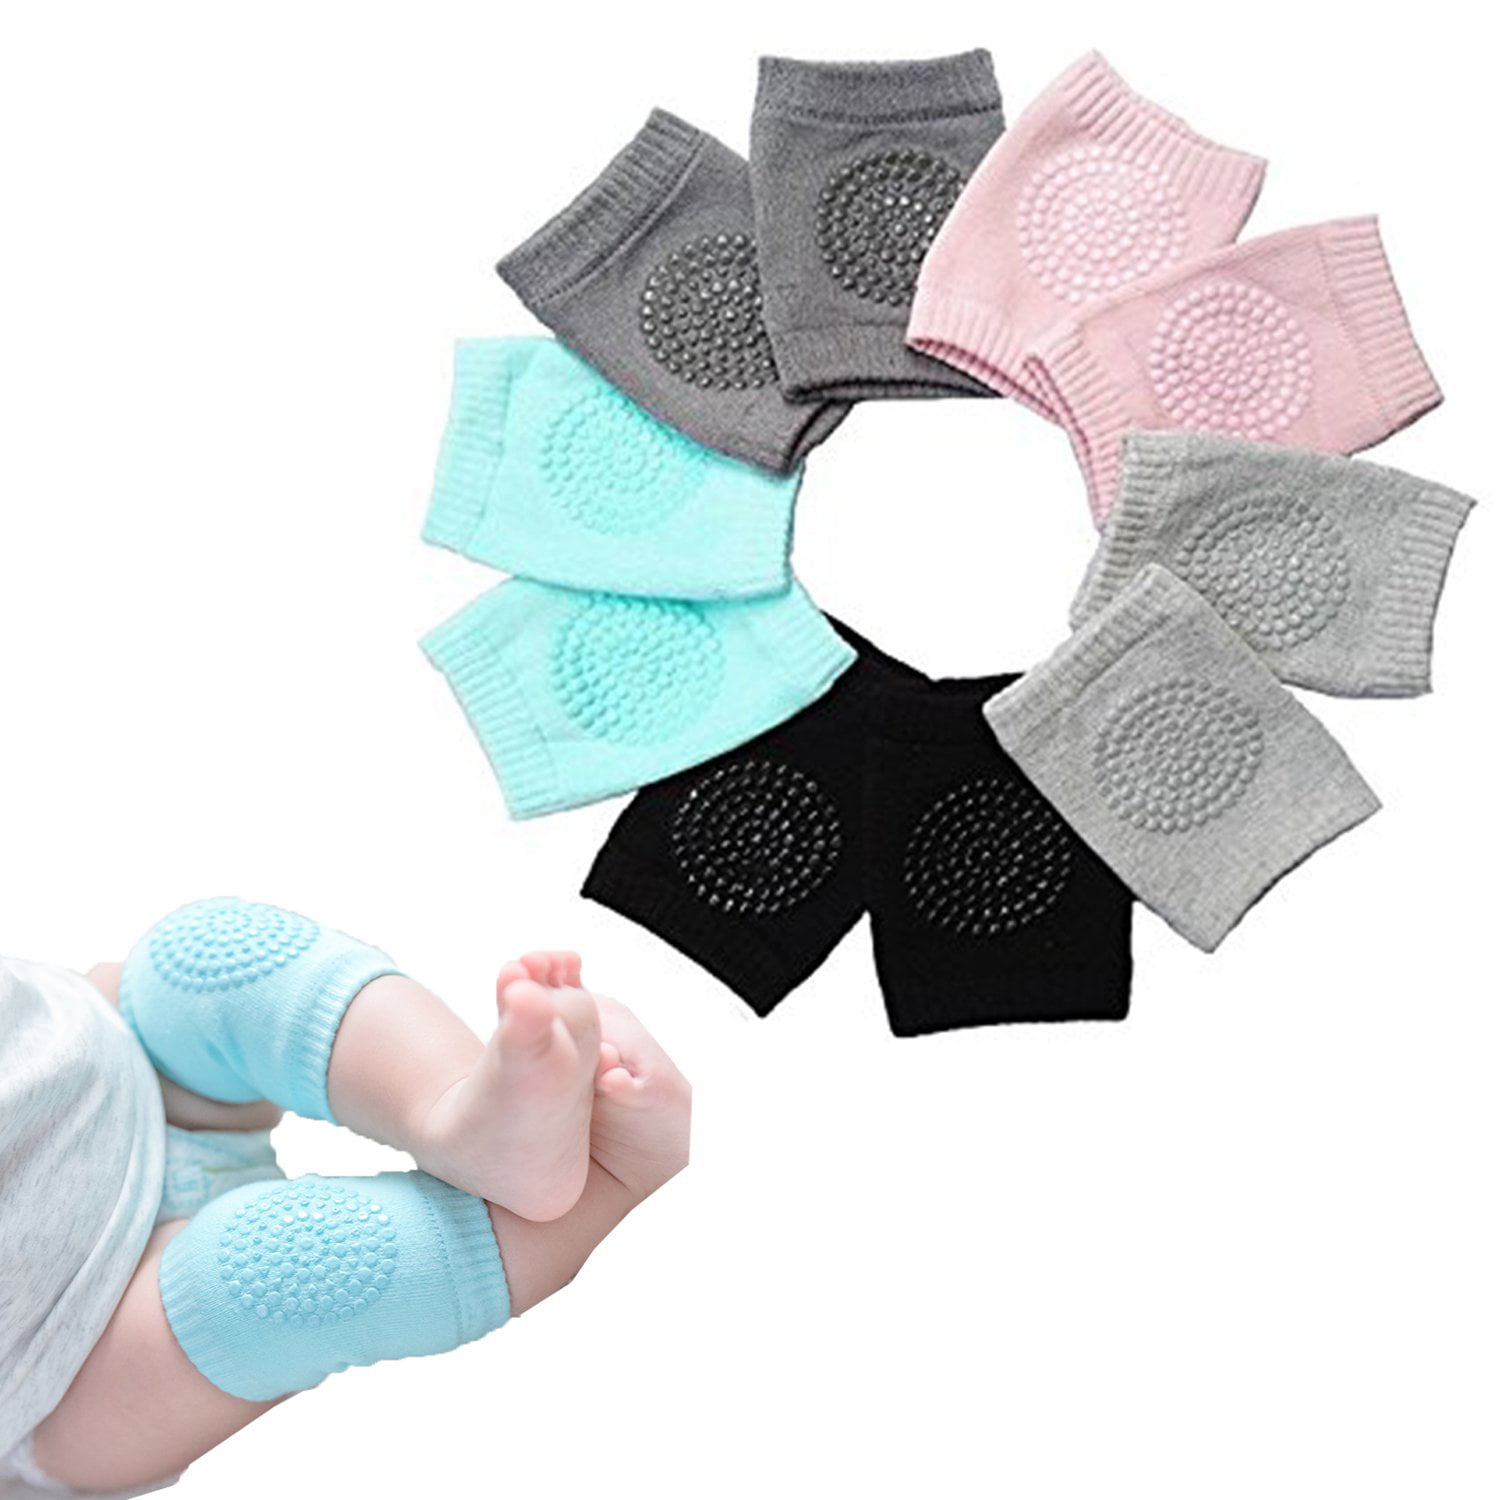 Yinuoday Baby Knee Pads for Crawling,2 pair Toddler Anti-slip Adjustable Kneepads,Leg Warmer Safety Protective Cover for Baby Boys or Girls 